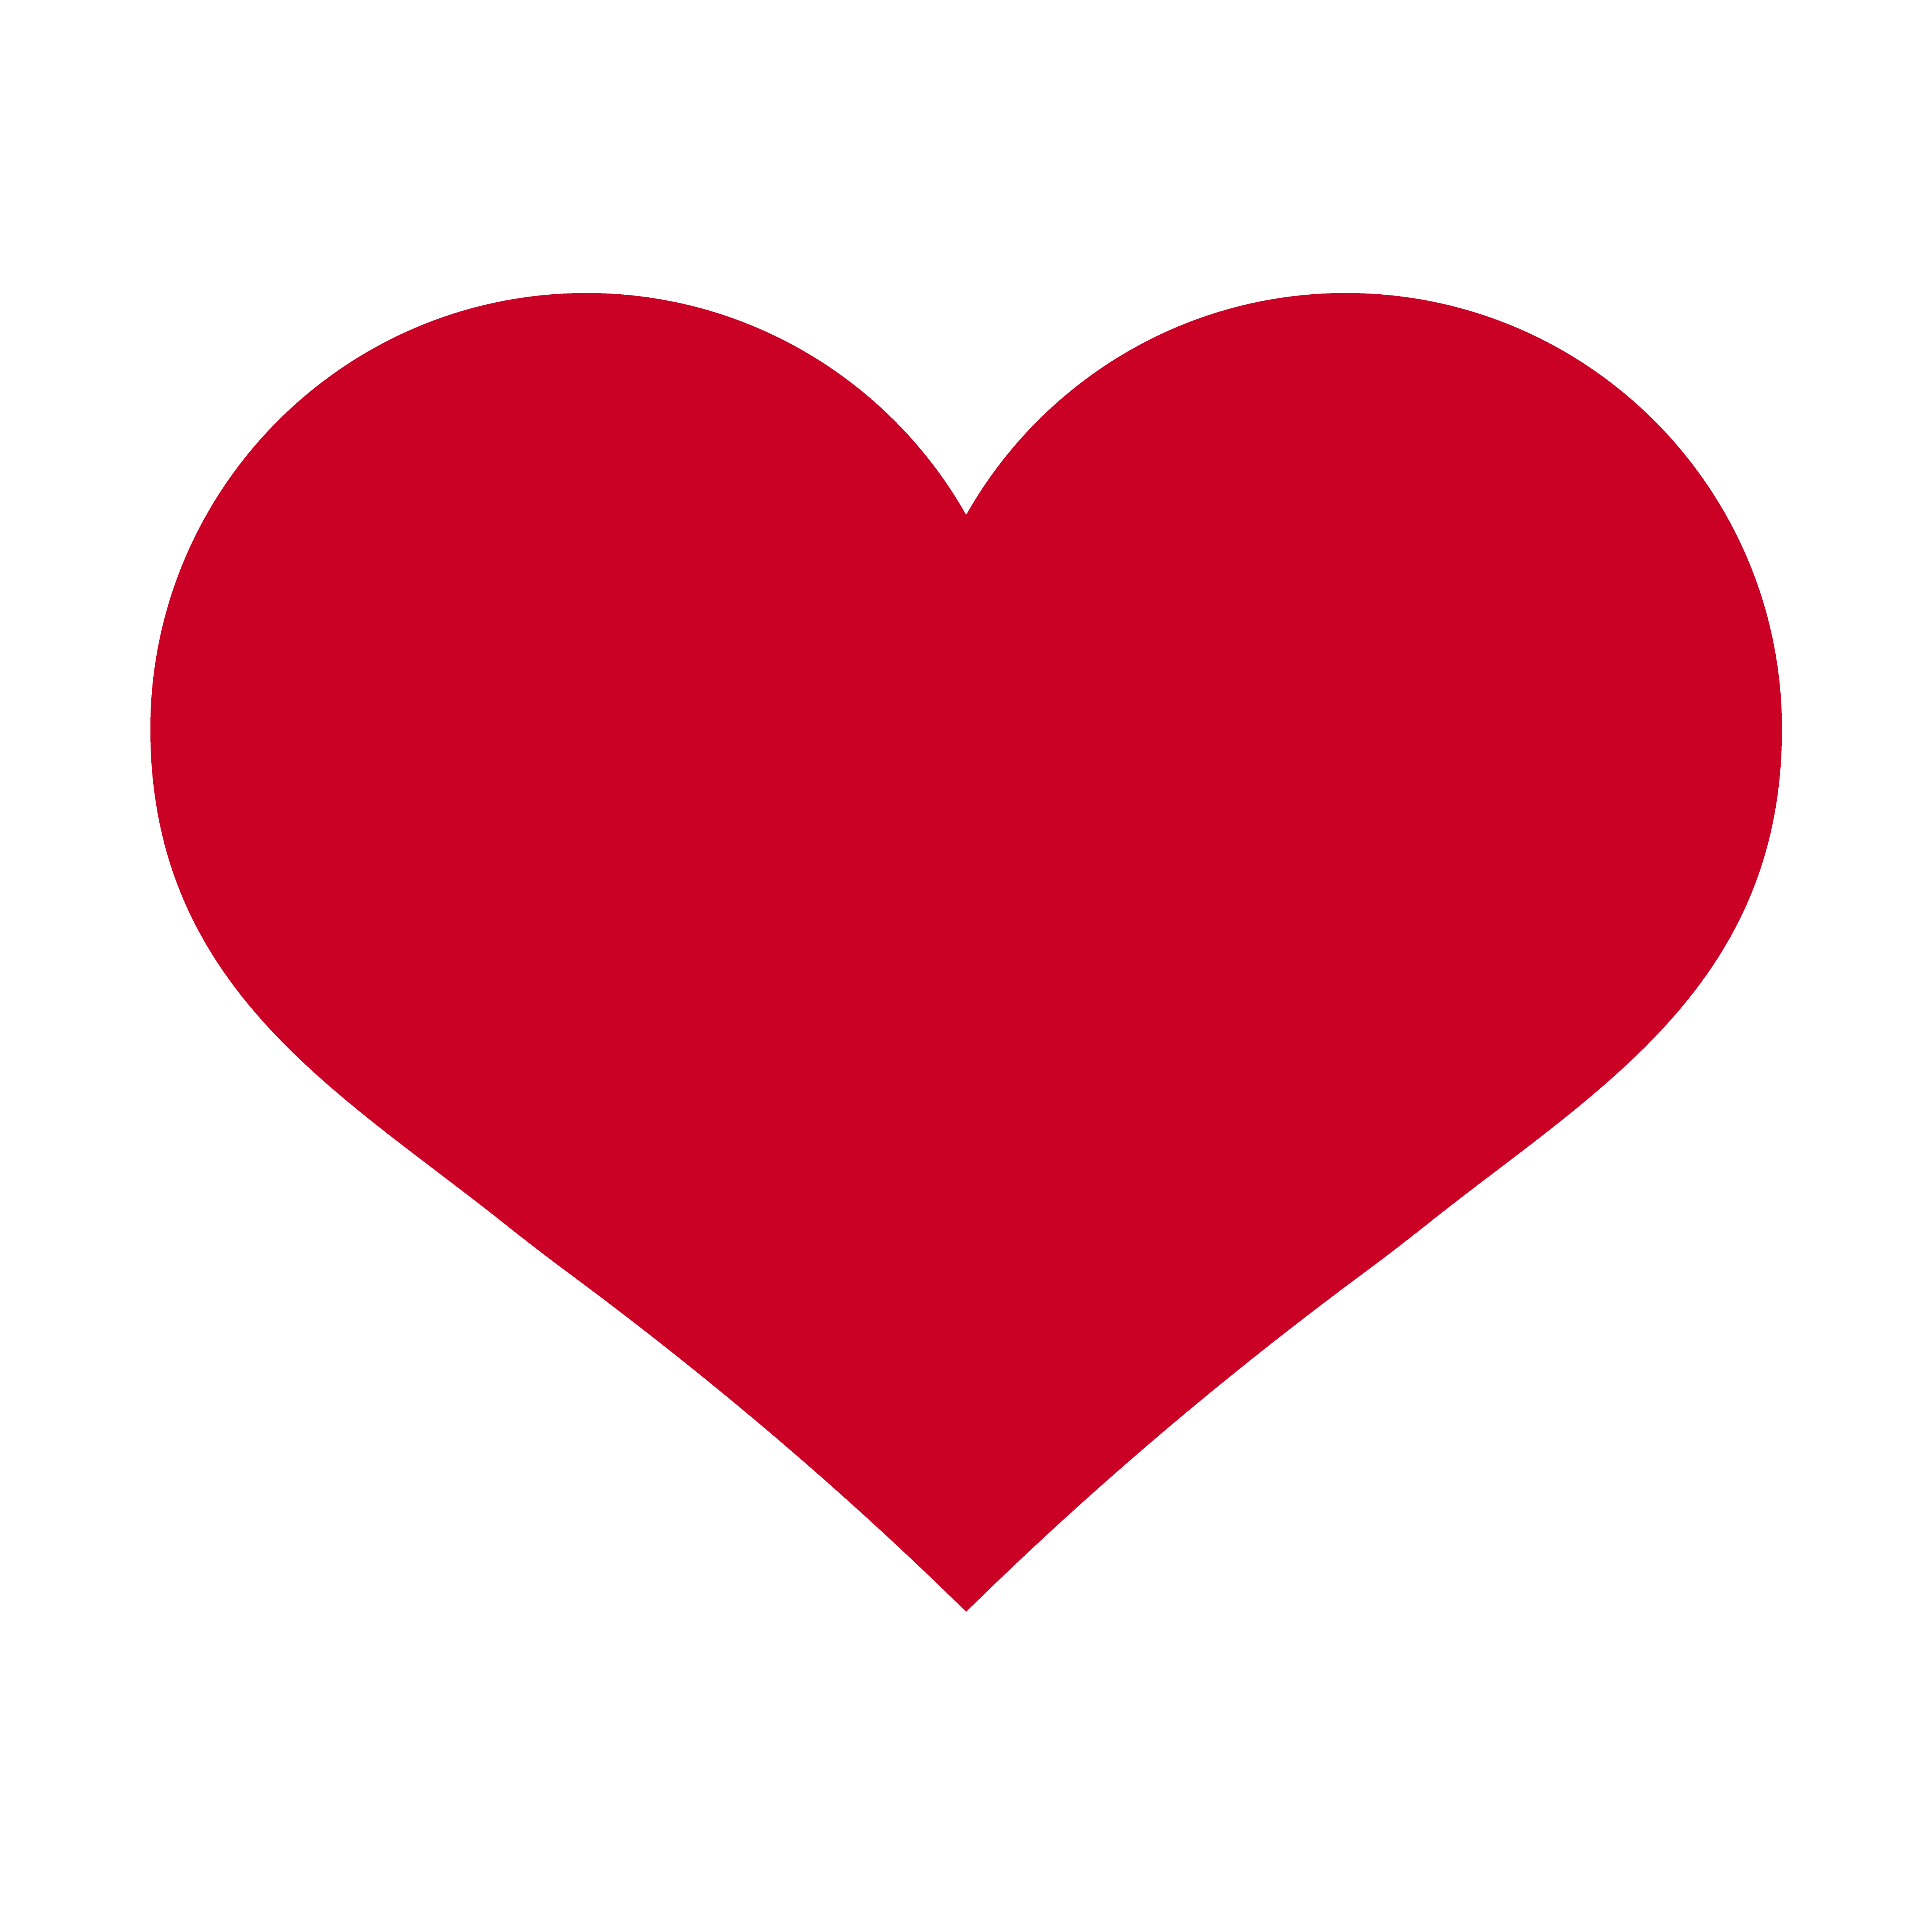 Heart, Symbol of Love and Valentine's Day. Flat Red Icon Isolated on